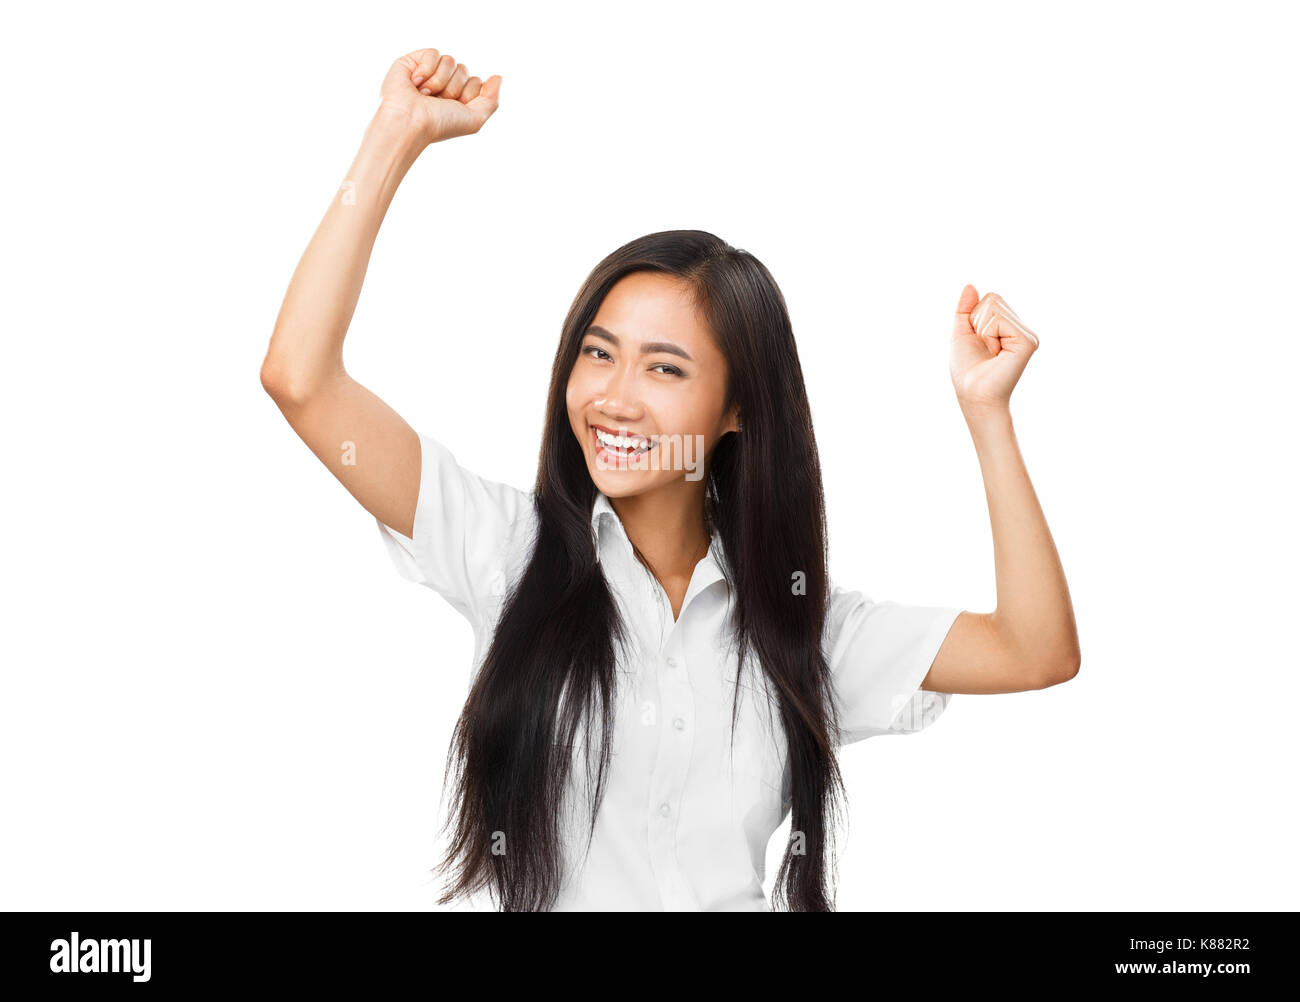 Happy young oriental woman dancing or rejoicing. Portrait of cheerful smiling Asian girl with hands up. Joyful emotions, victory, entertainment concep Stock Photo